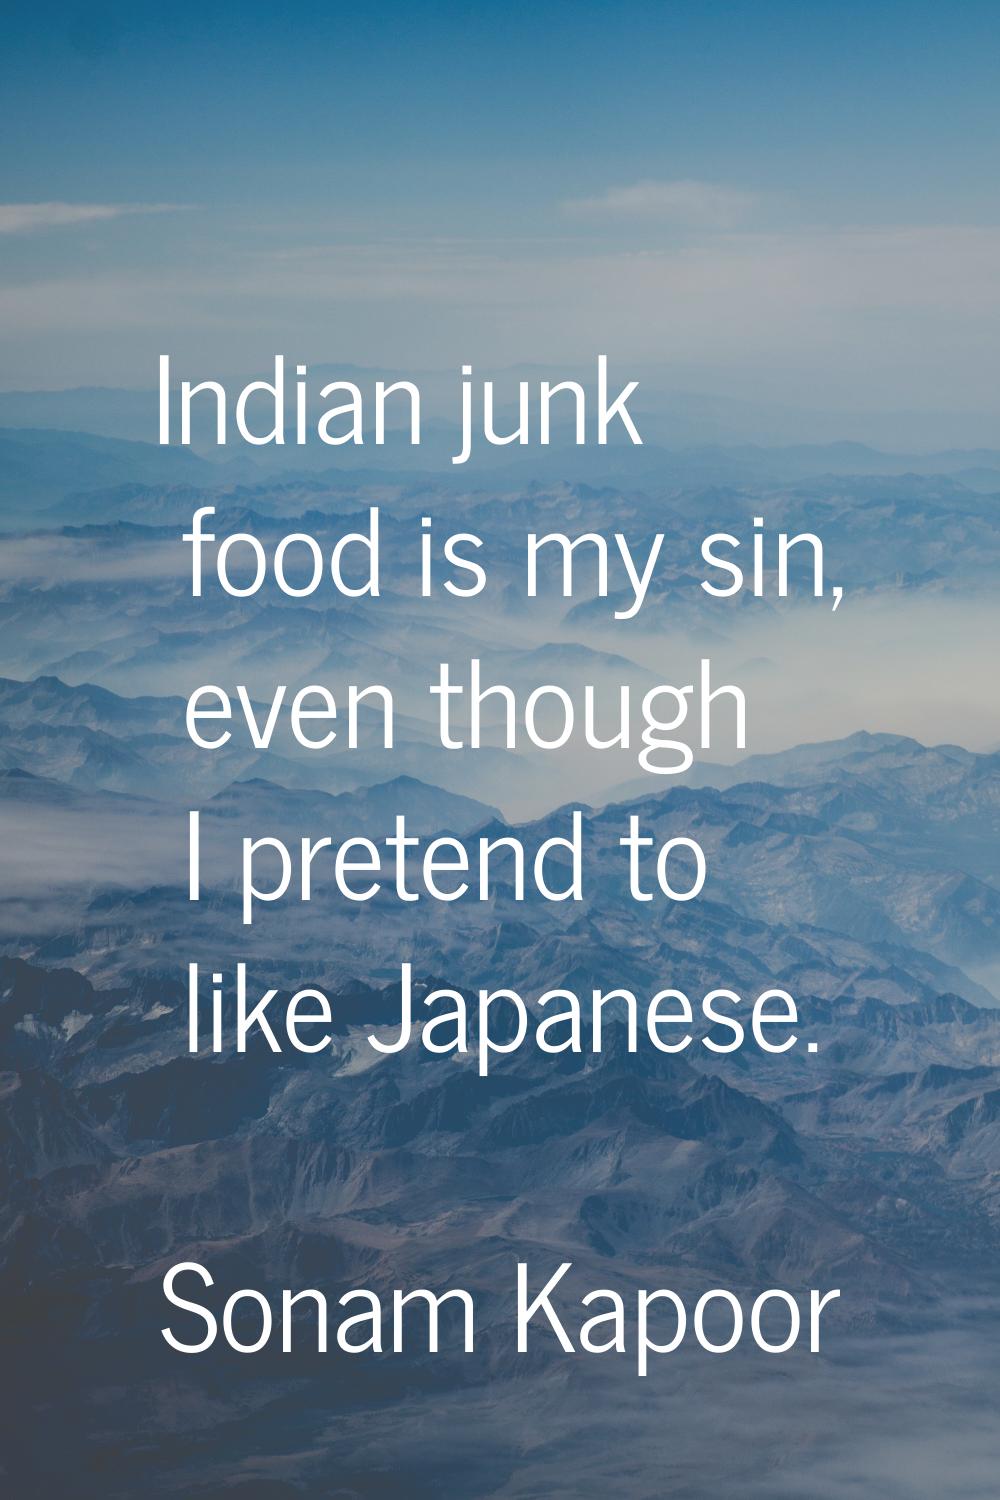 Indian junk food is my sin, even though I pretend to like Japanese.